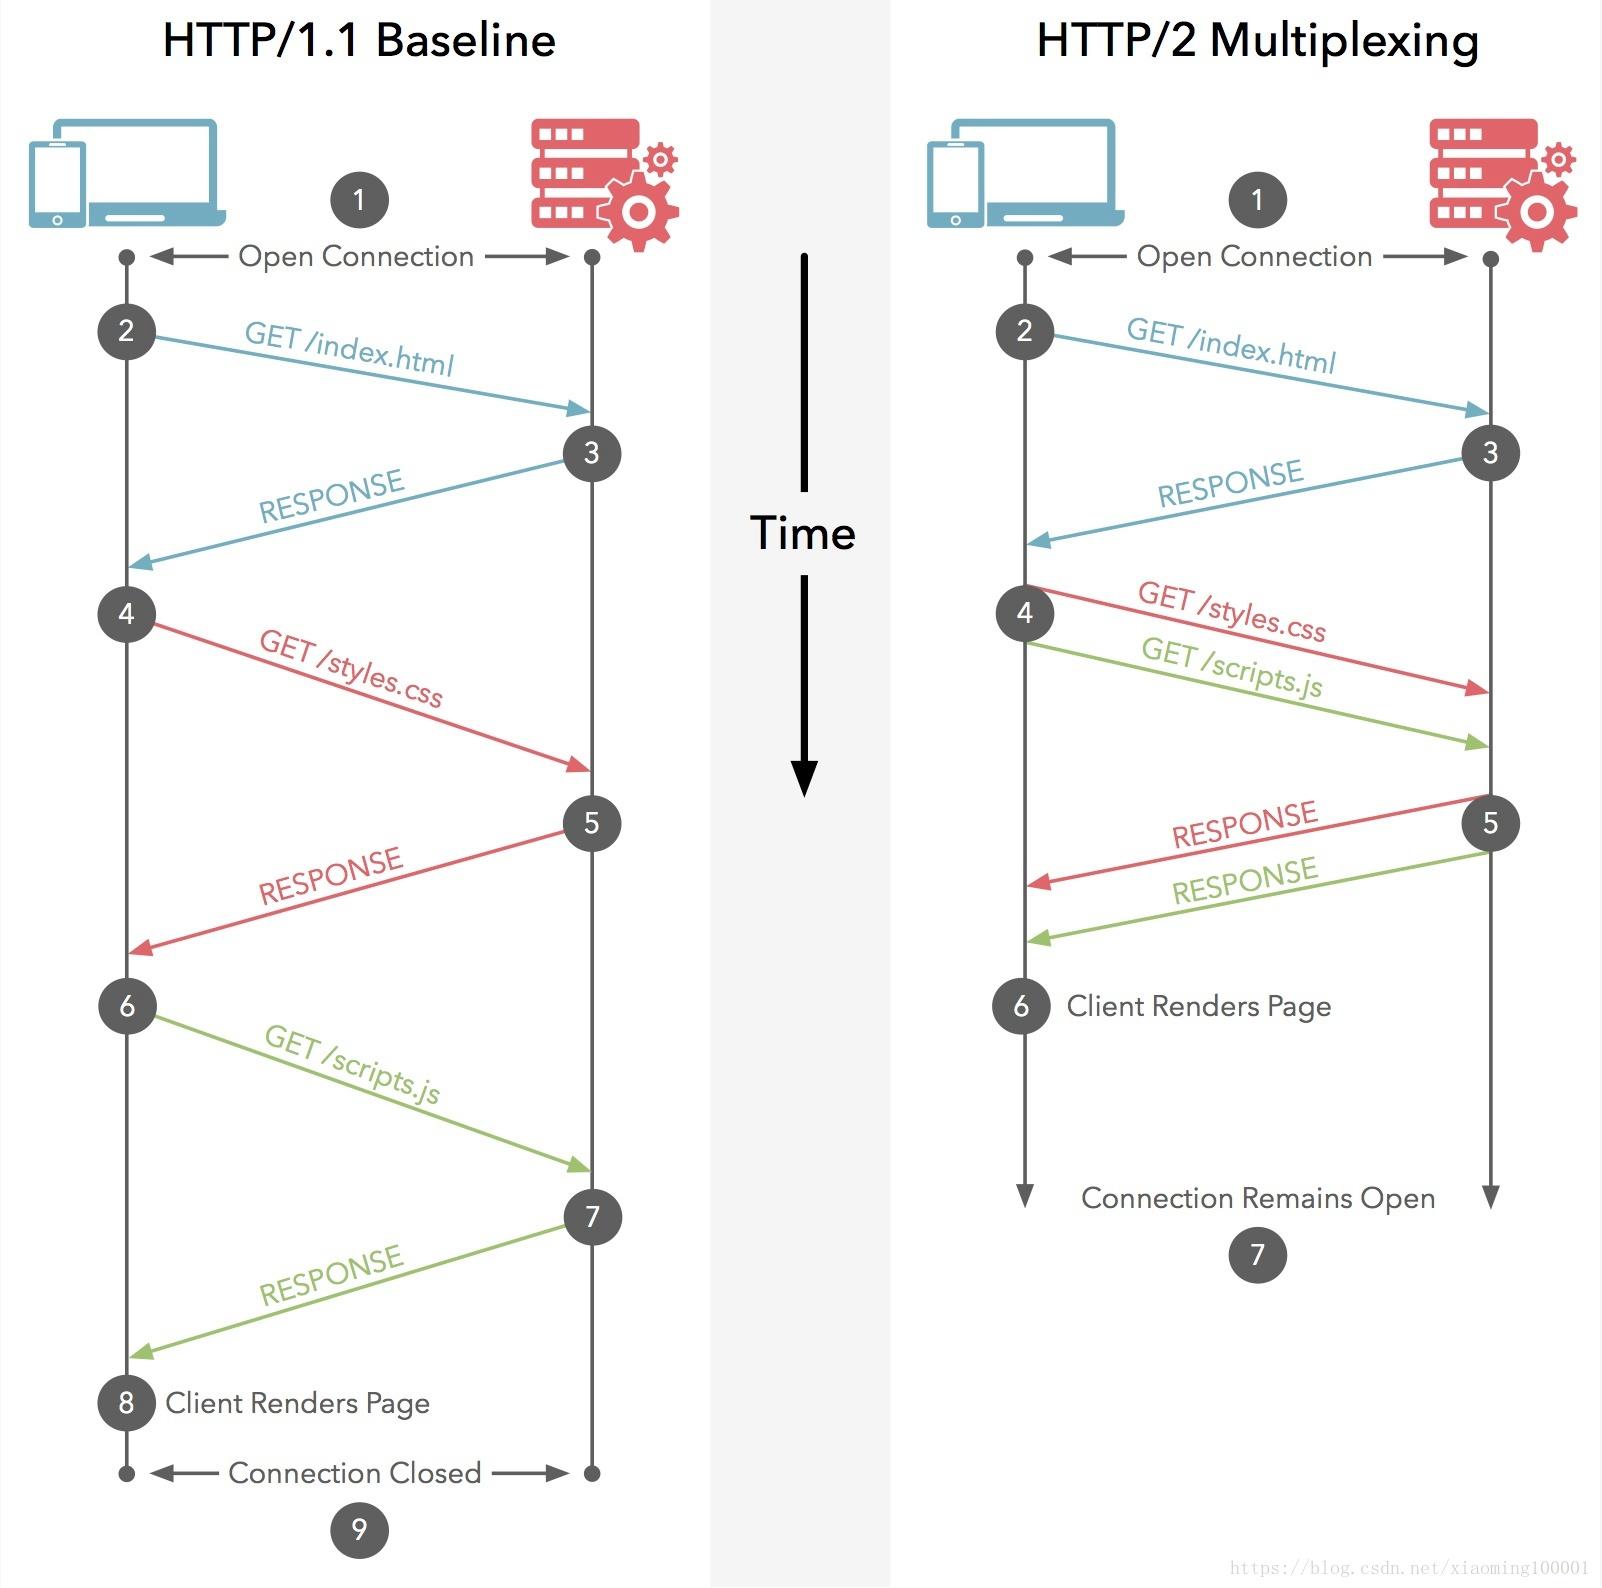 HTTP/1.1 and HTTP/2 comparison. HTTP/2 is more efficient.